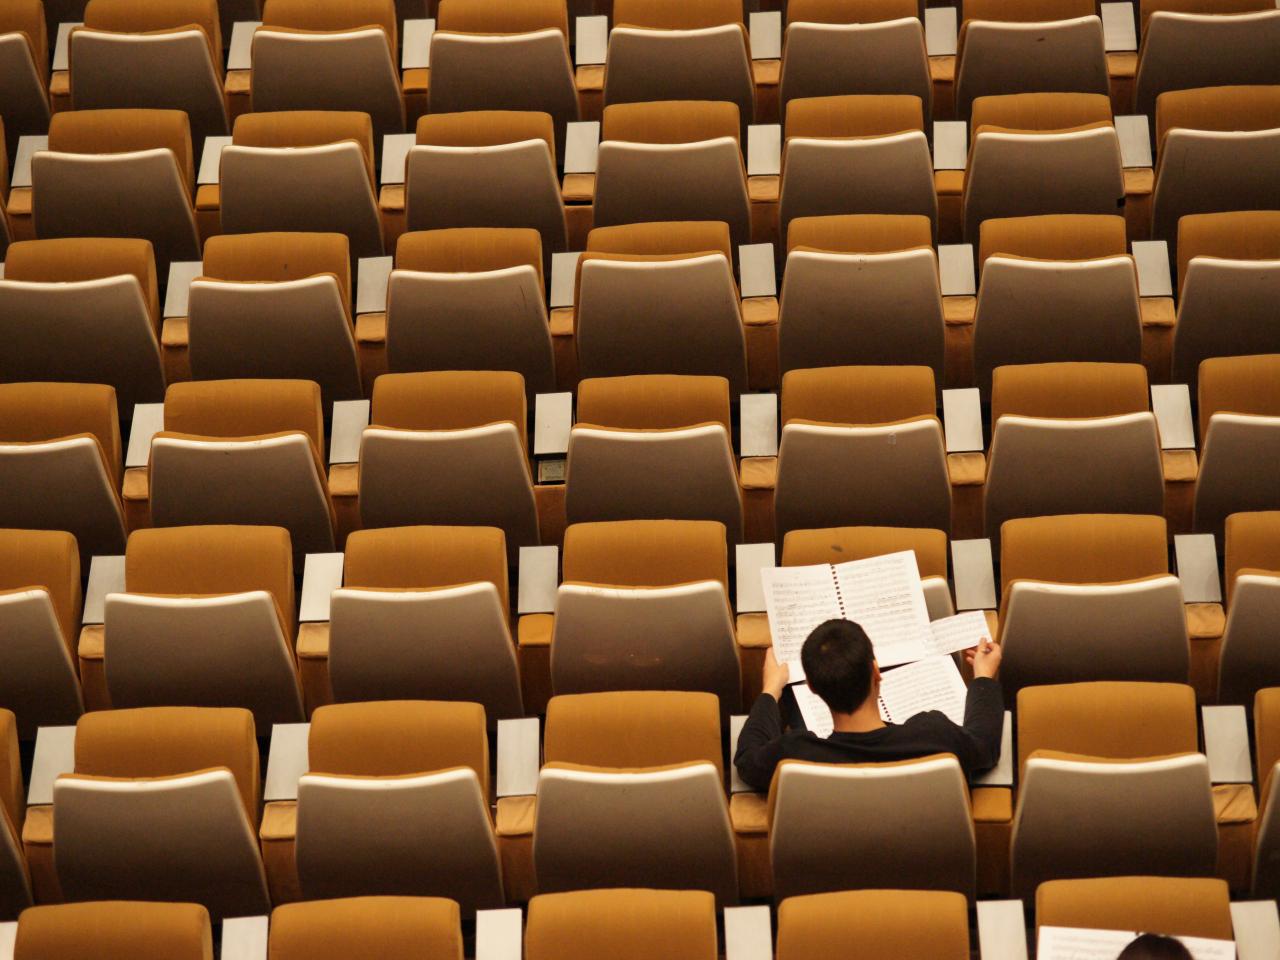 Overhead view of empty, orange seats in an auditorium style classroom. One student in the lower right sits and reads from two open notebooks.